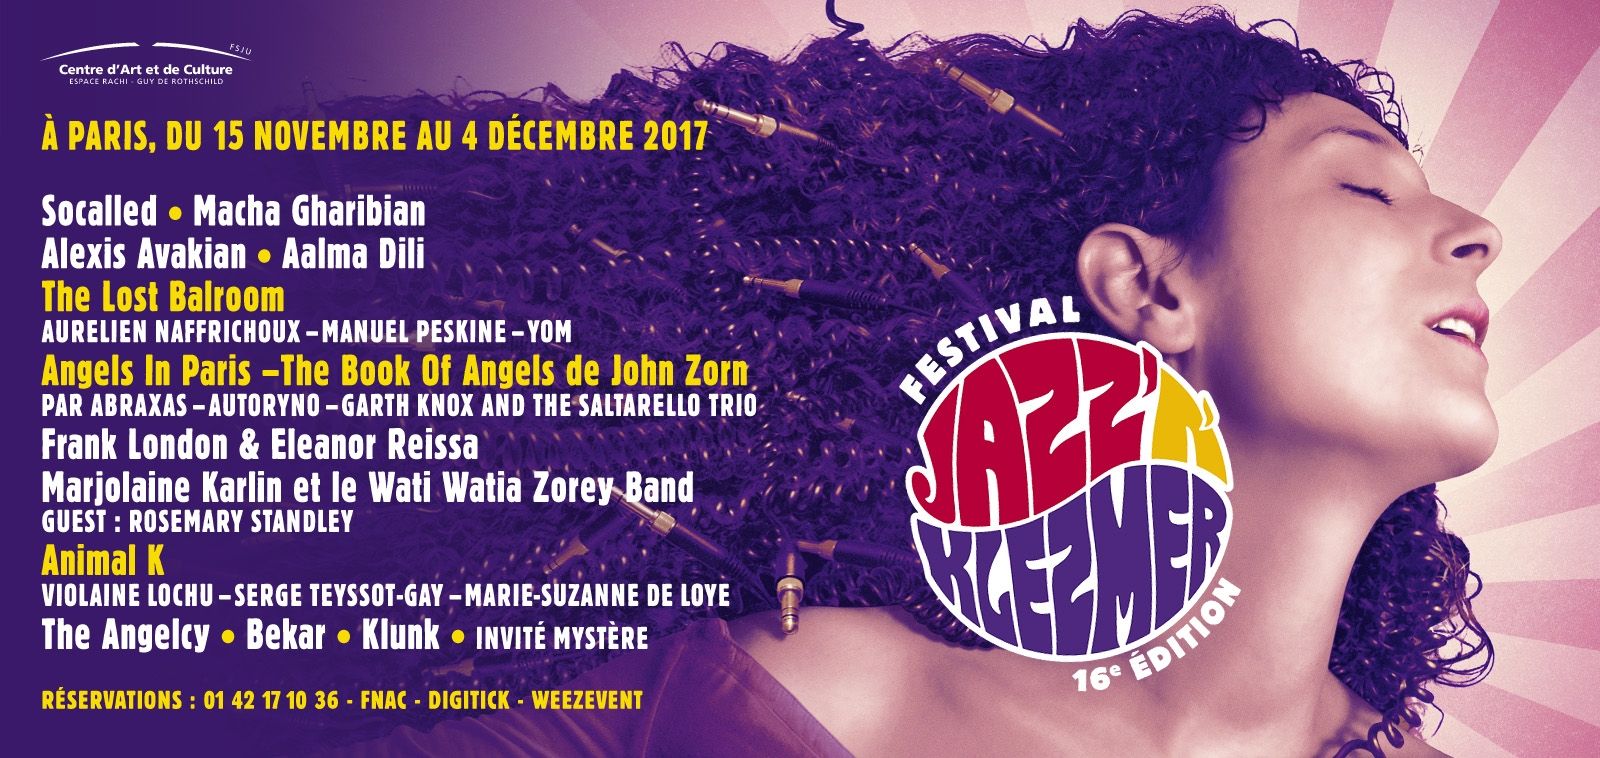 16th Edition of the Jazz’N’Klezmer Festival - From november 15th to december 4th - Paris